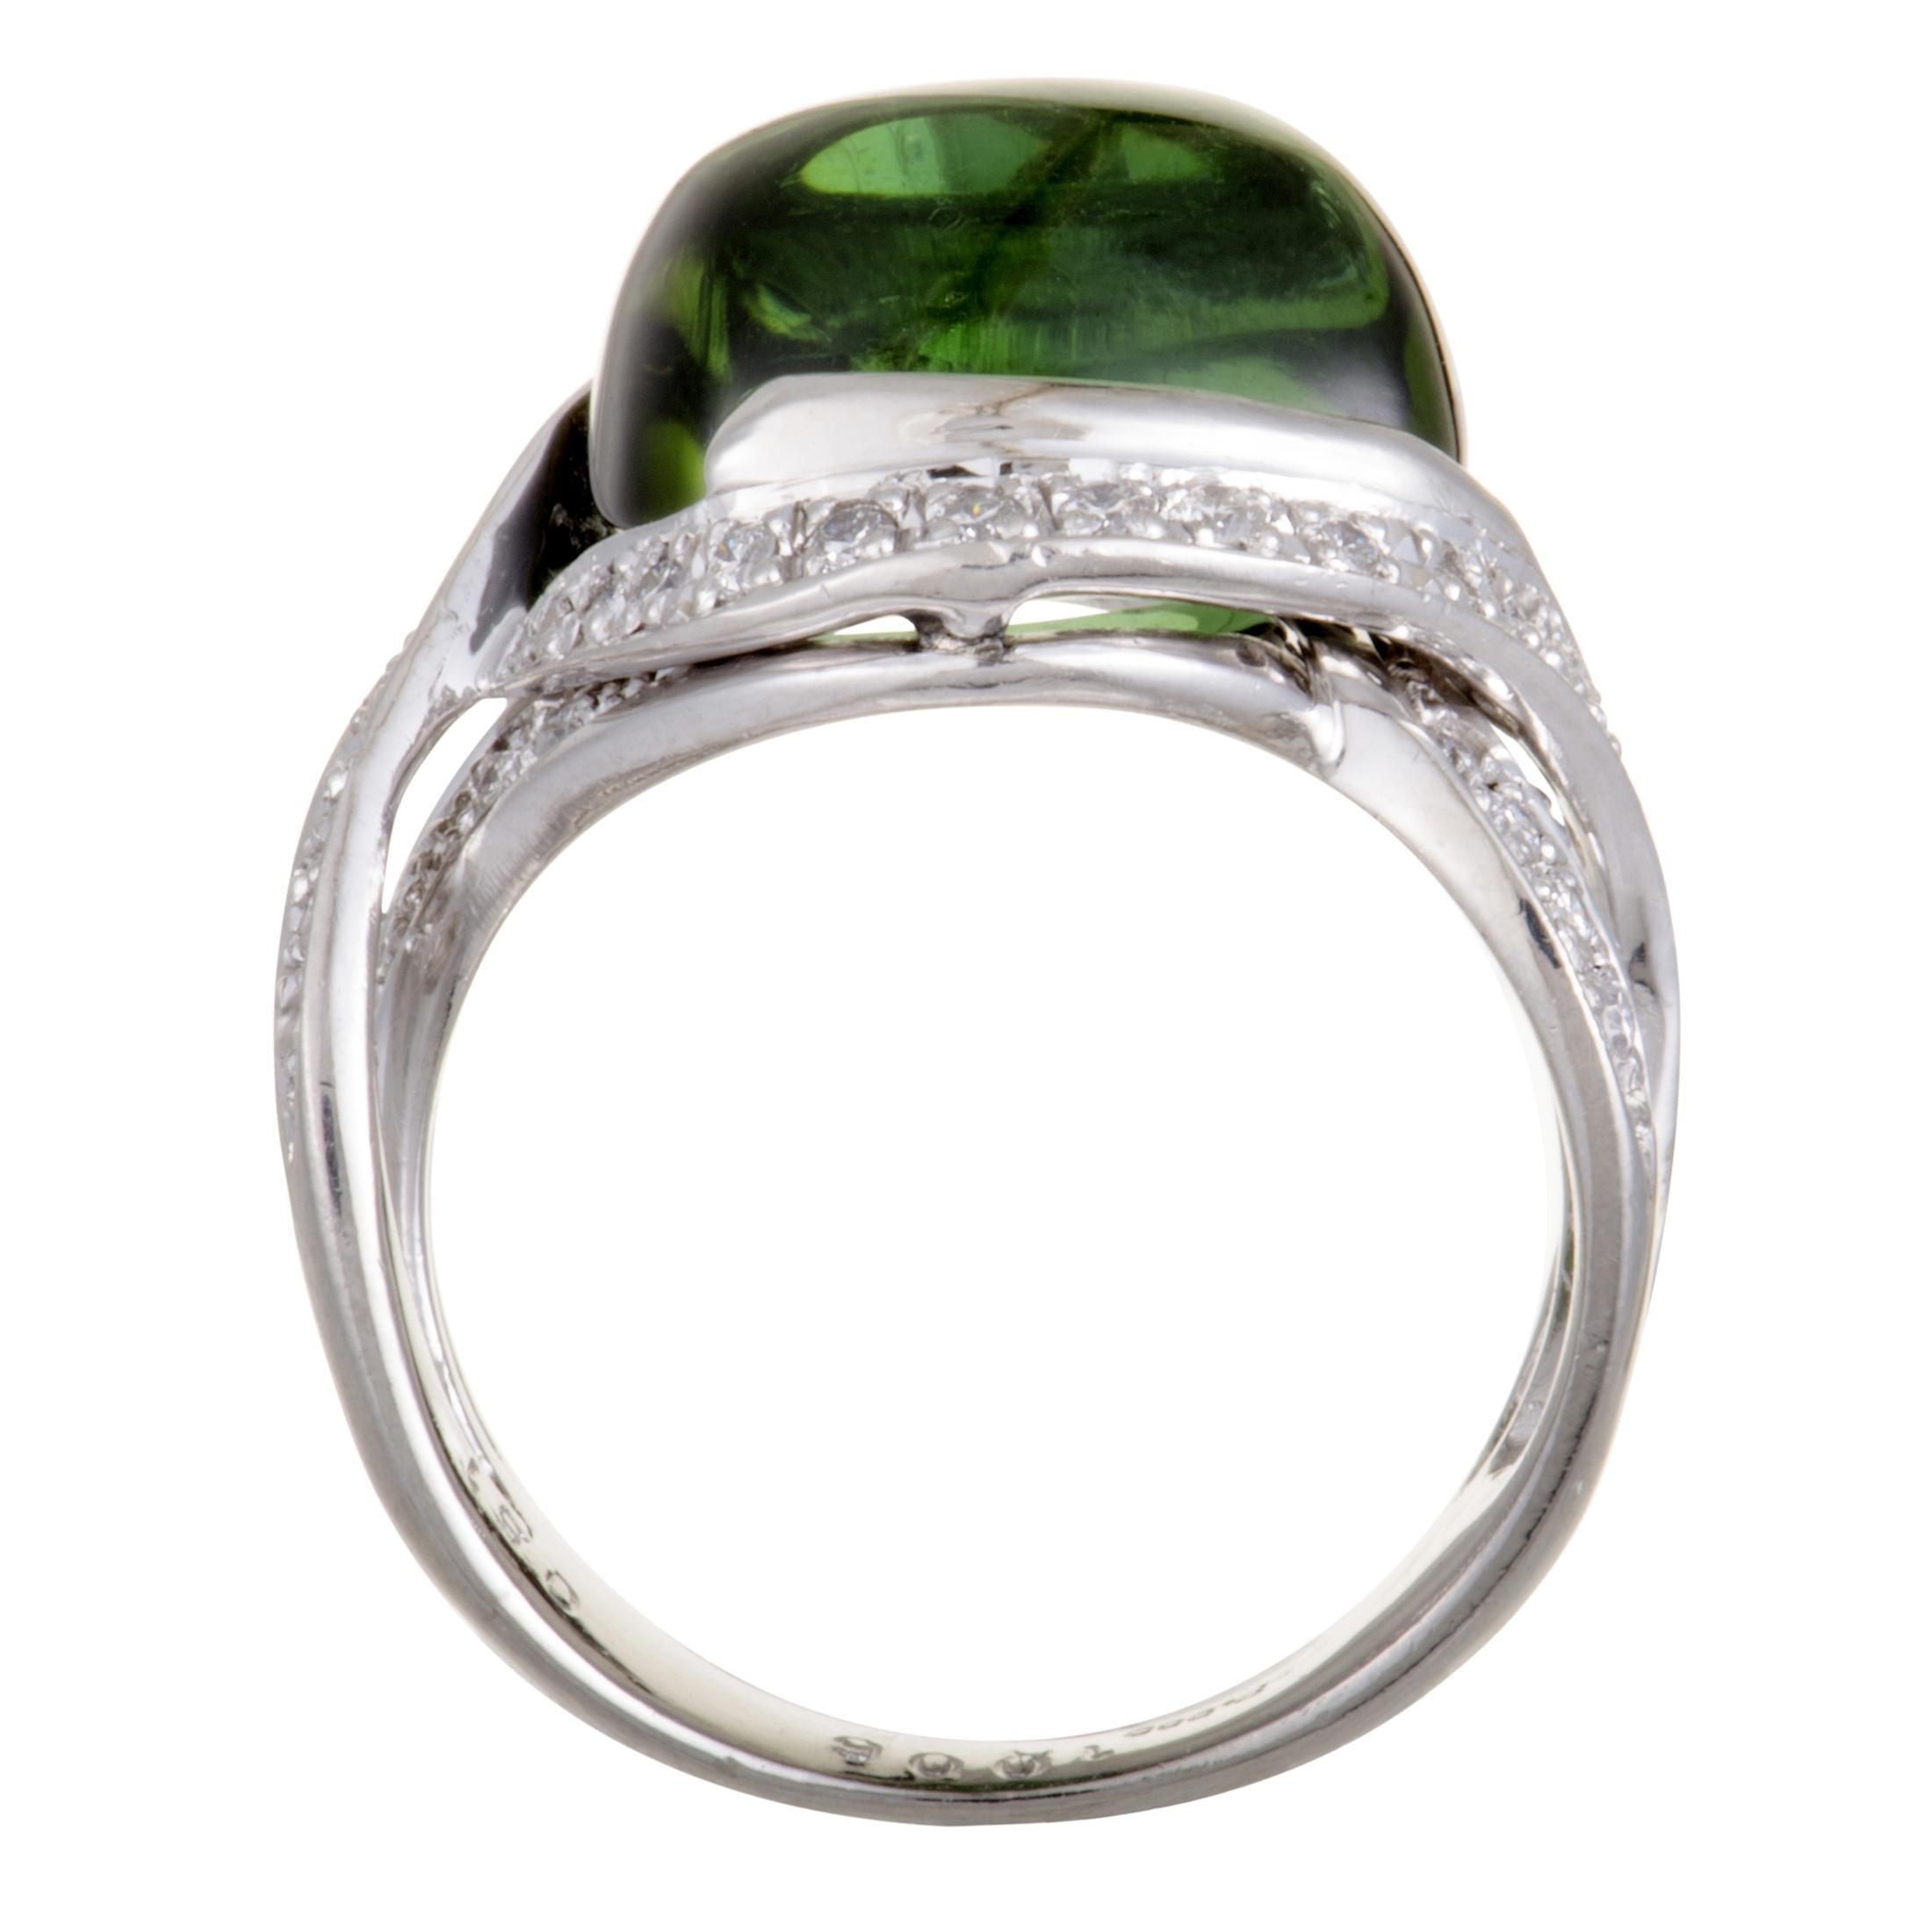 Designed in a wonderfully sophisticated manner and attractively decorated with resplendent gems, this exceptional piece is a sight to behold. Made of platinum, the ring is set with a striking green tourmaline that weighs astounding 10.06 carats,